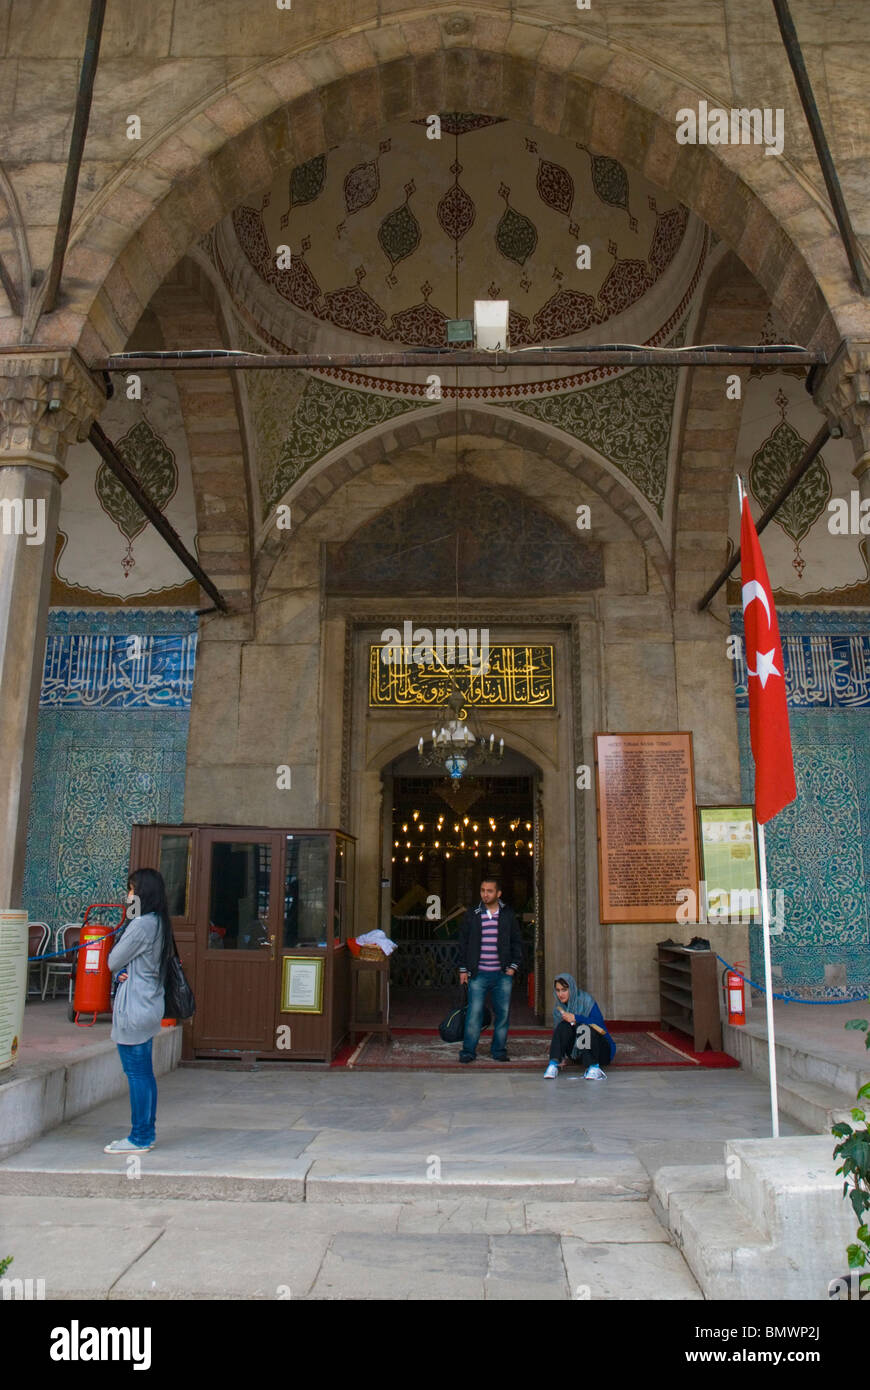 Entrance to the tombs by Yeni Camii mosque Sultanahmet Istanbul Turkey Europe Stock Photo